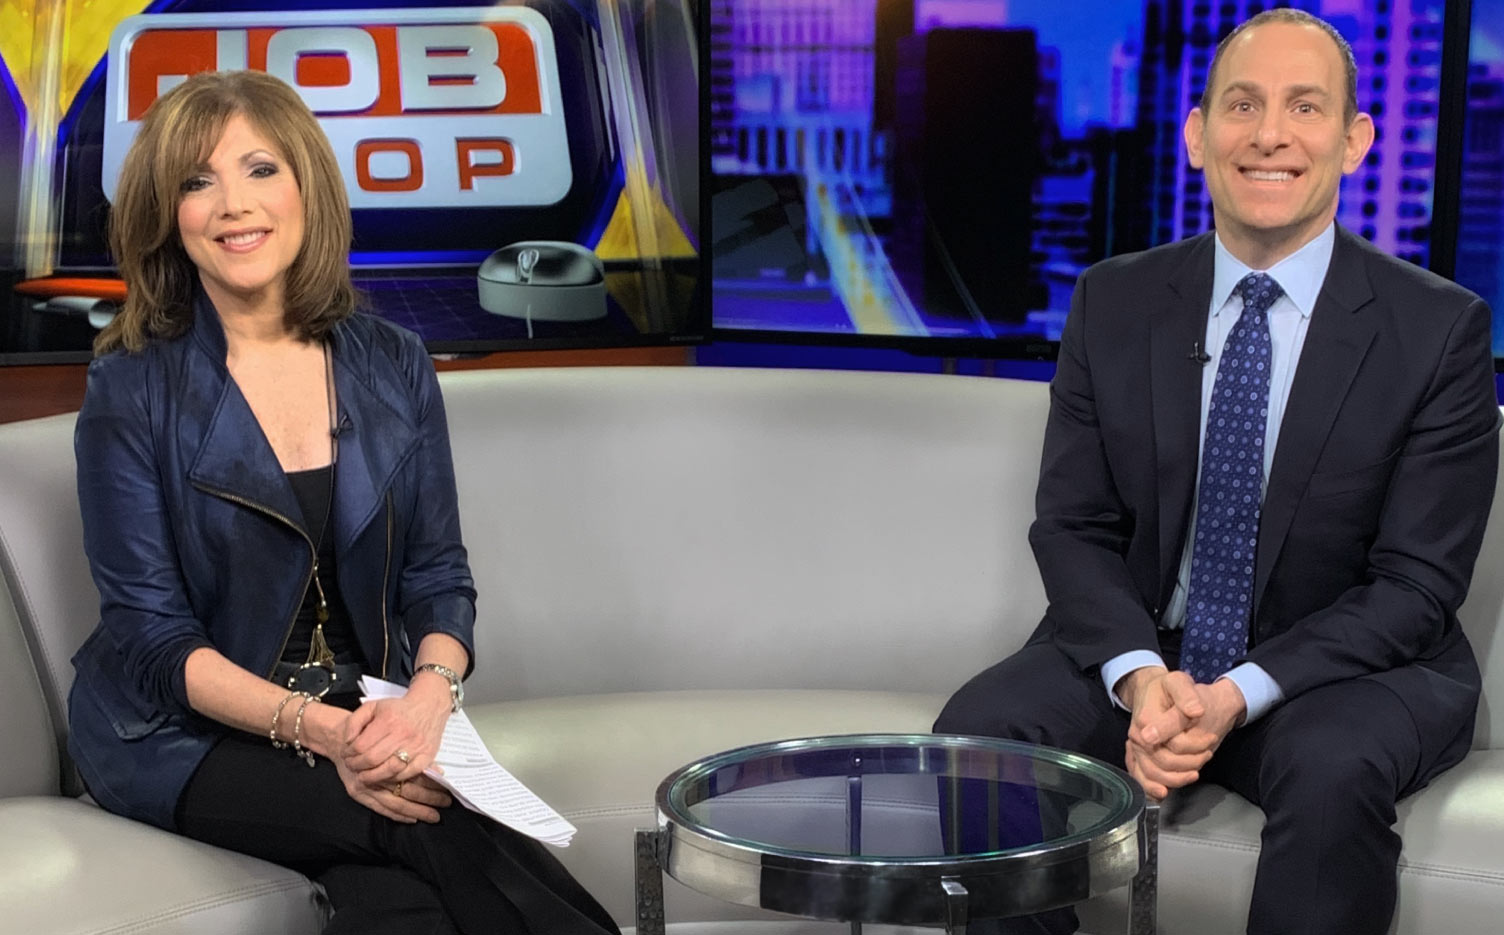 Jon Talks with Fox 2 News Anchor Sherry Margolis: Advice on Finding a New Career After a Layoff